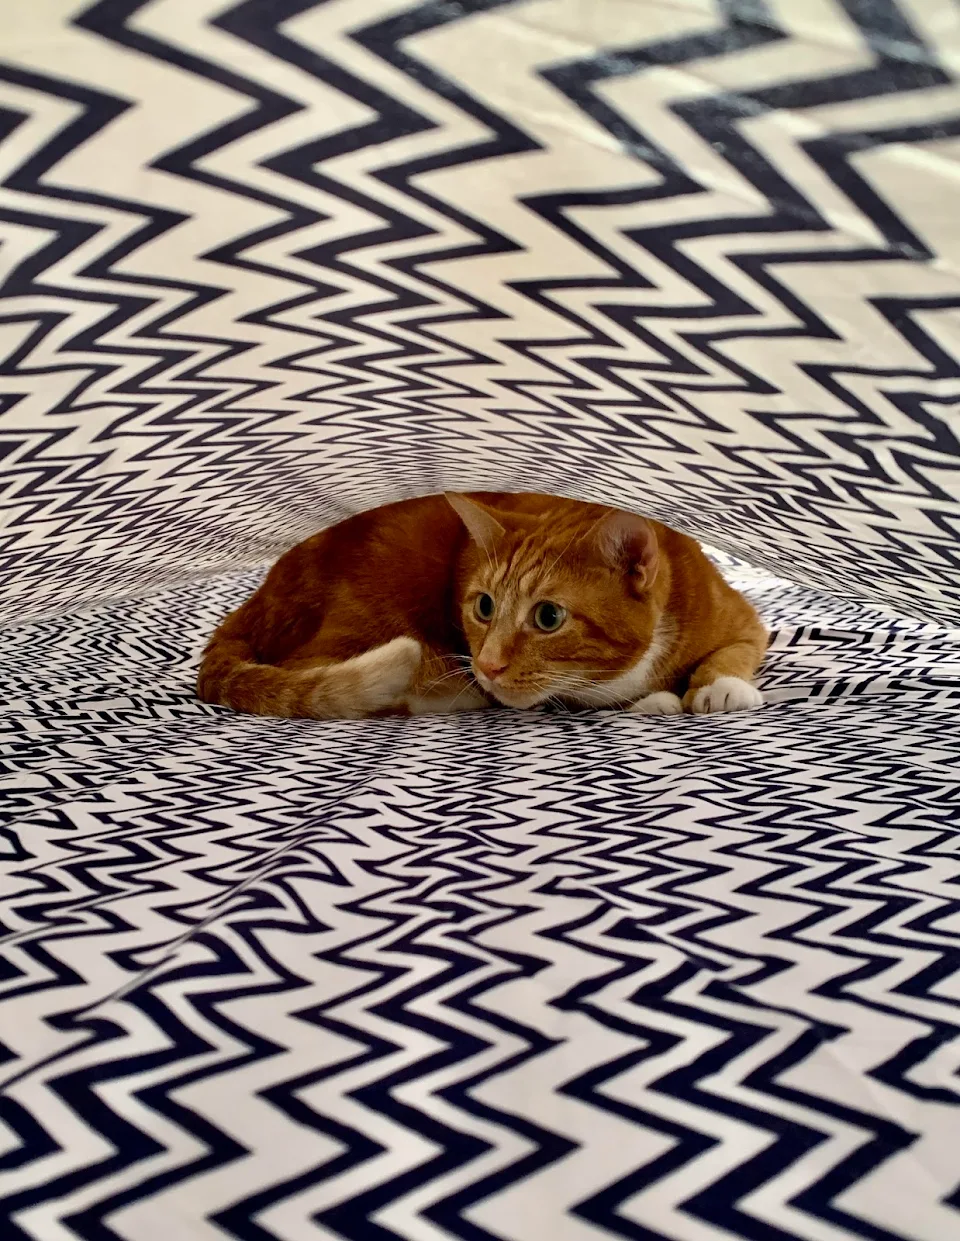 My cat underneath the sheets